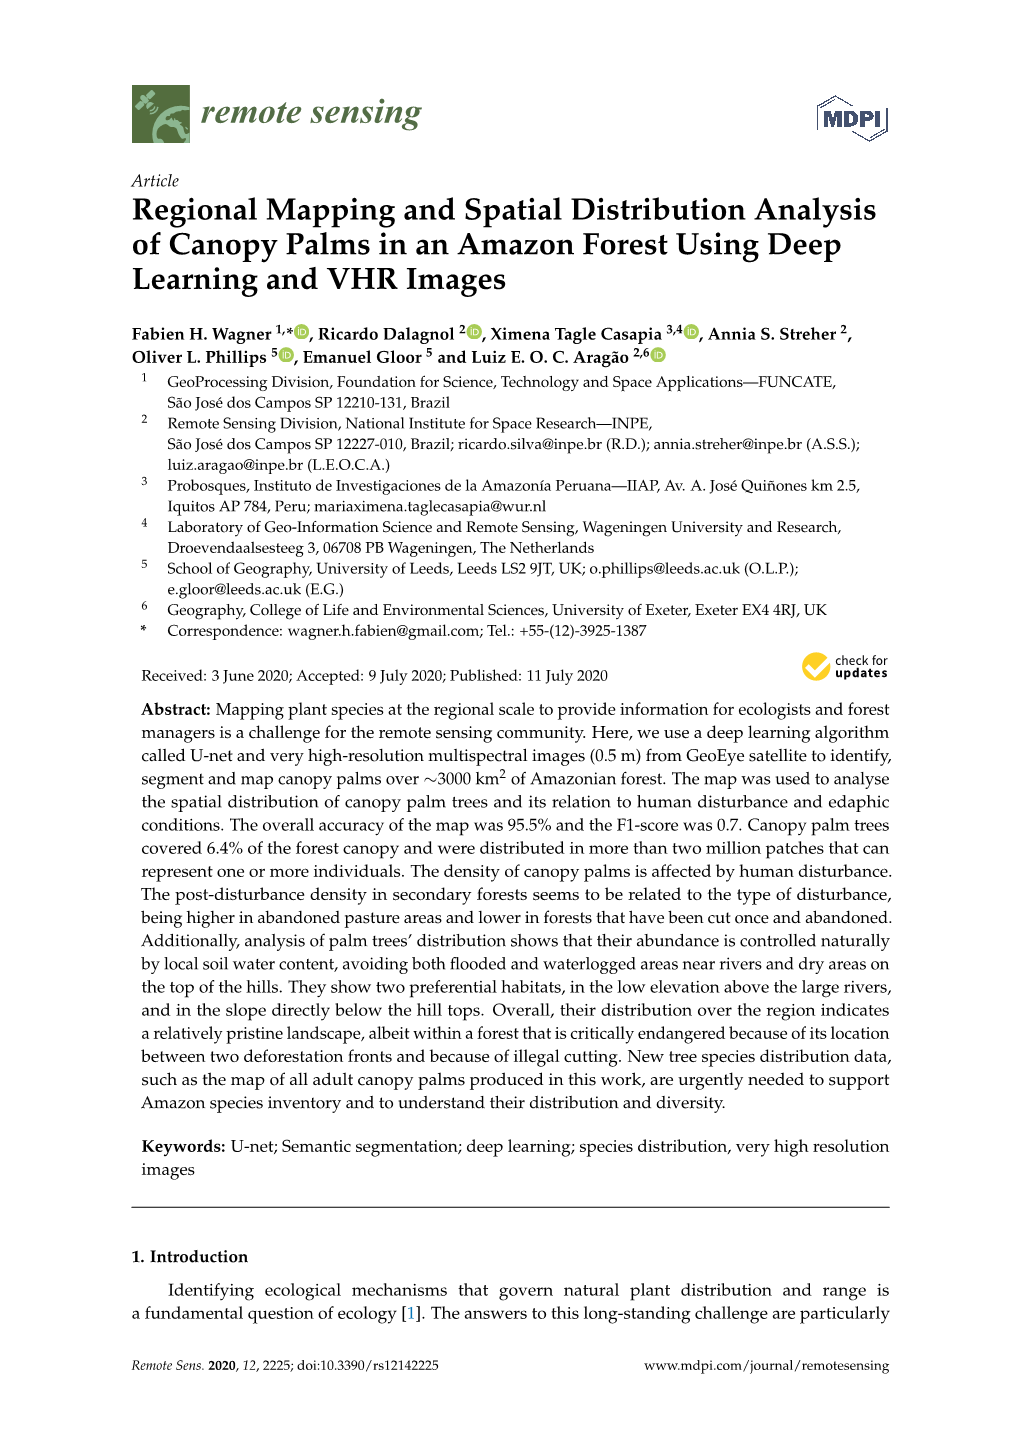 Regional Mapping and Spatial Distribution Analysis of Canopy Palms in an Amazon Forest Using Deep Learning and VHR Images